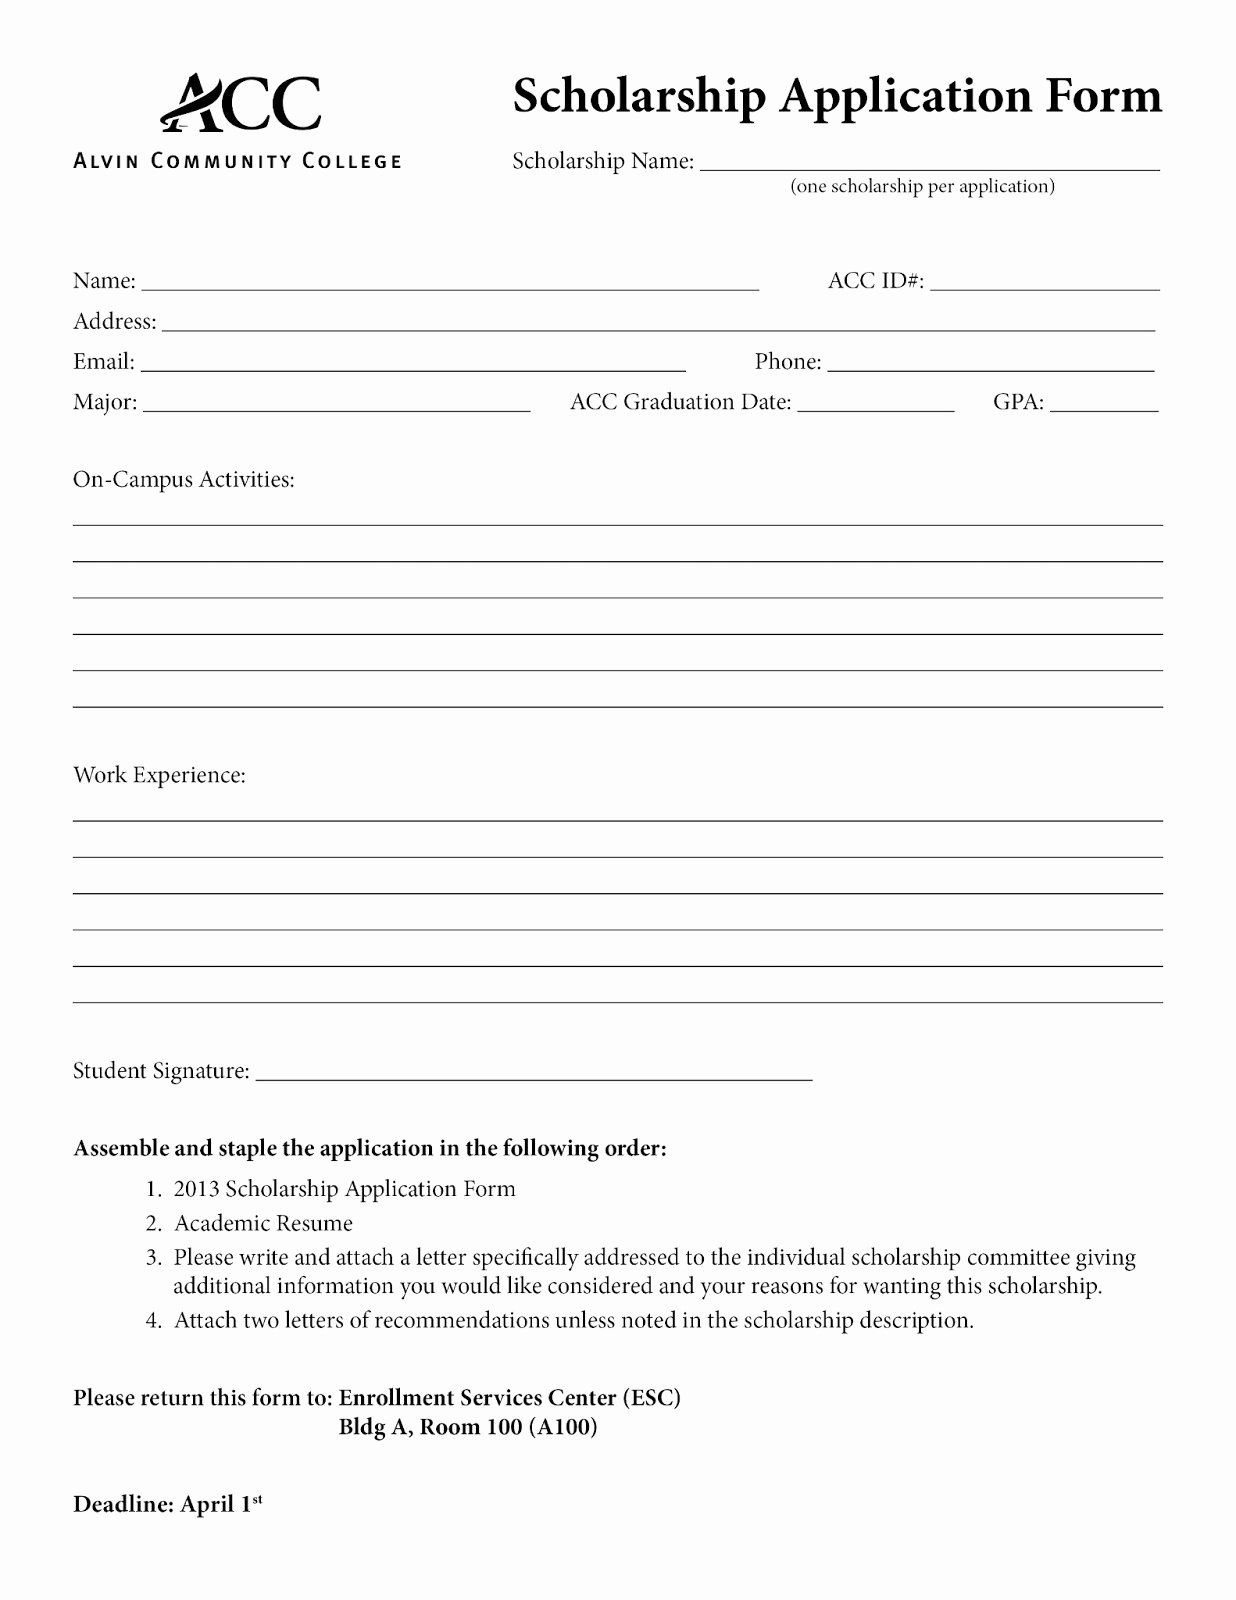 Application form Basic Application form Template